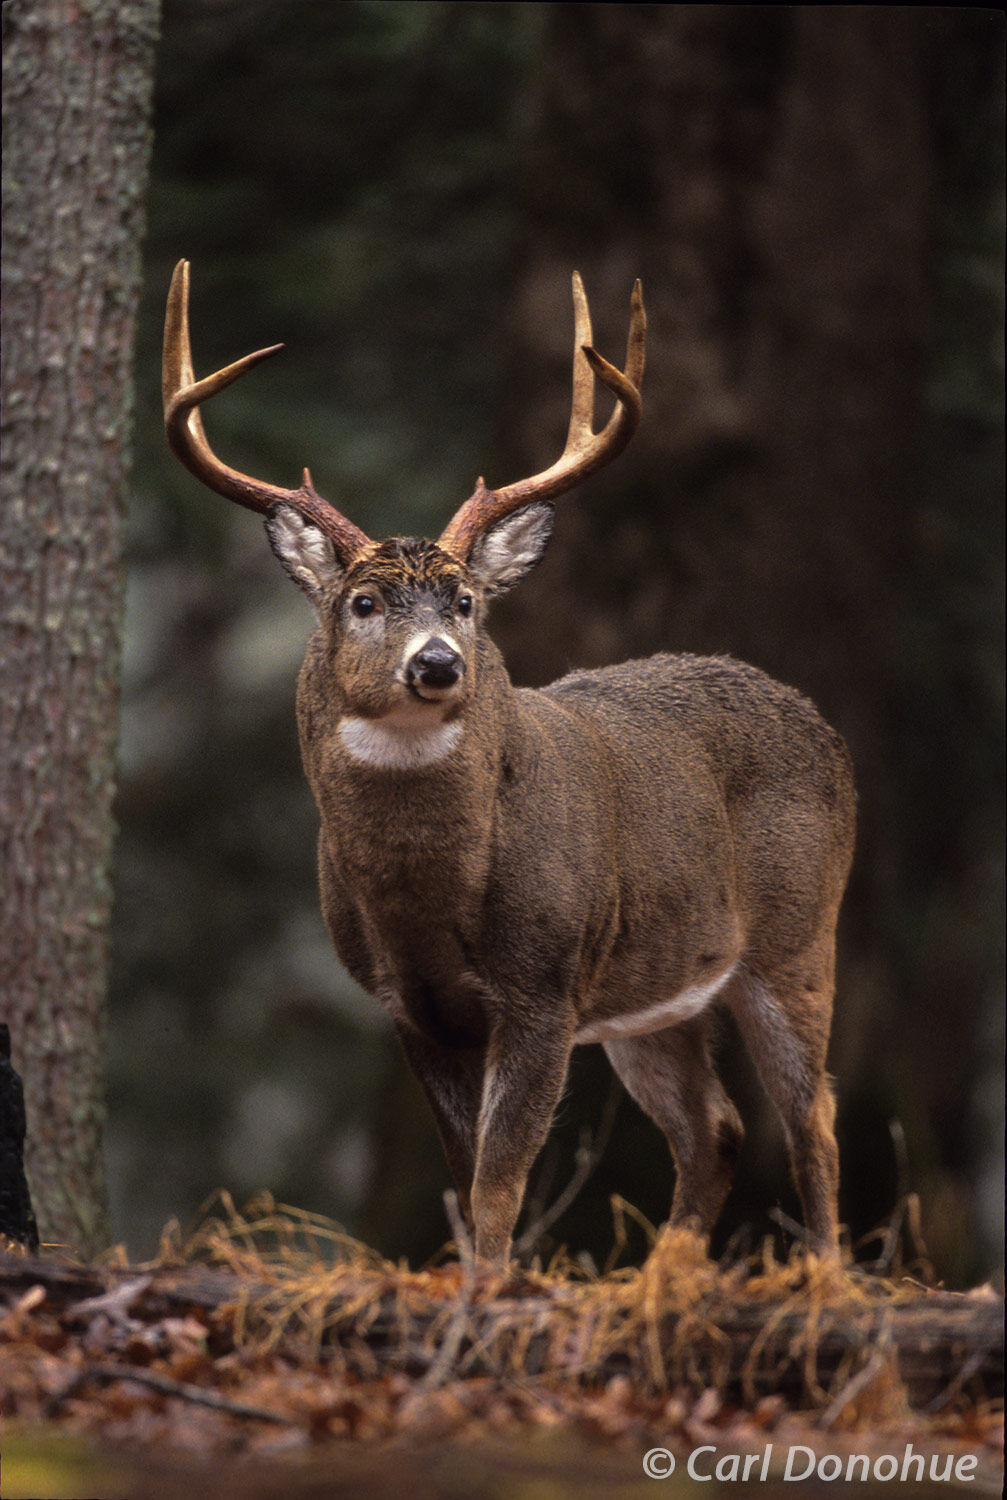 A big-bodied mature adult whitetail deer, 8 point buck standing in forest, Cades Cove, Great Smoky Mountains National Park, Tennessee...